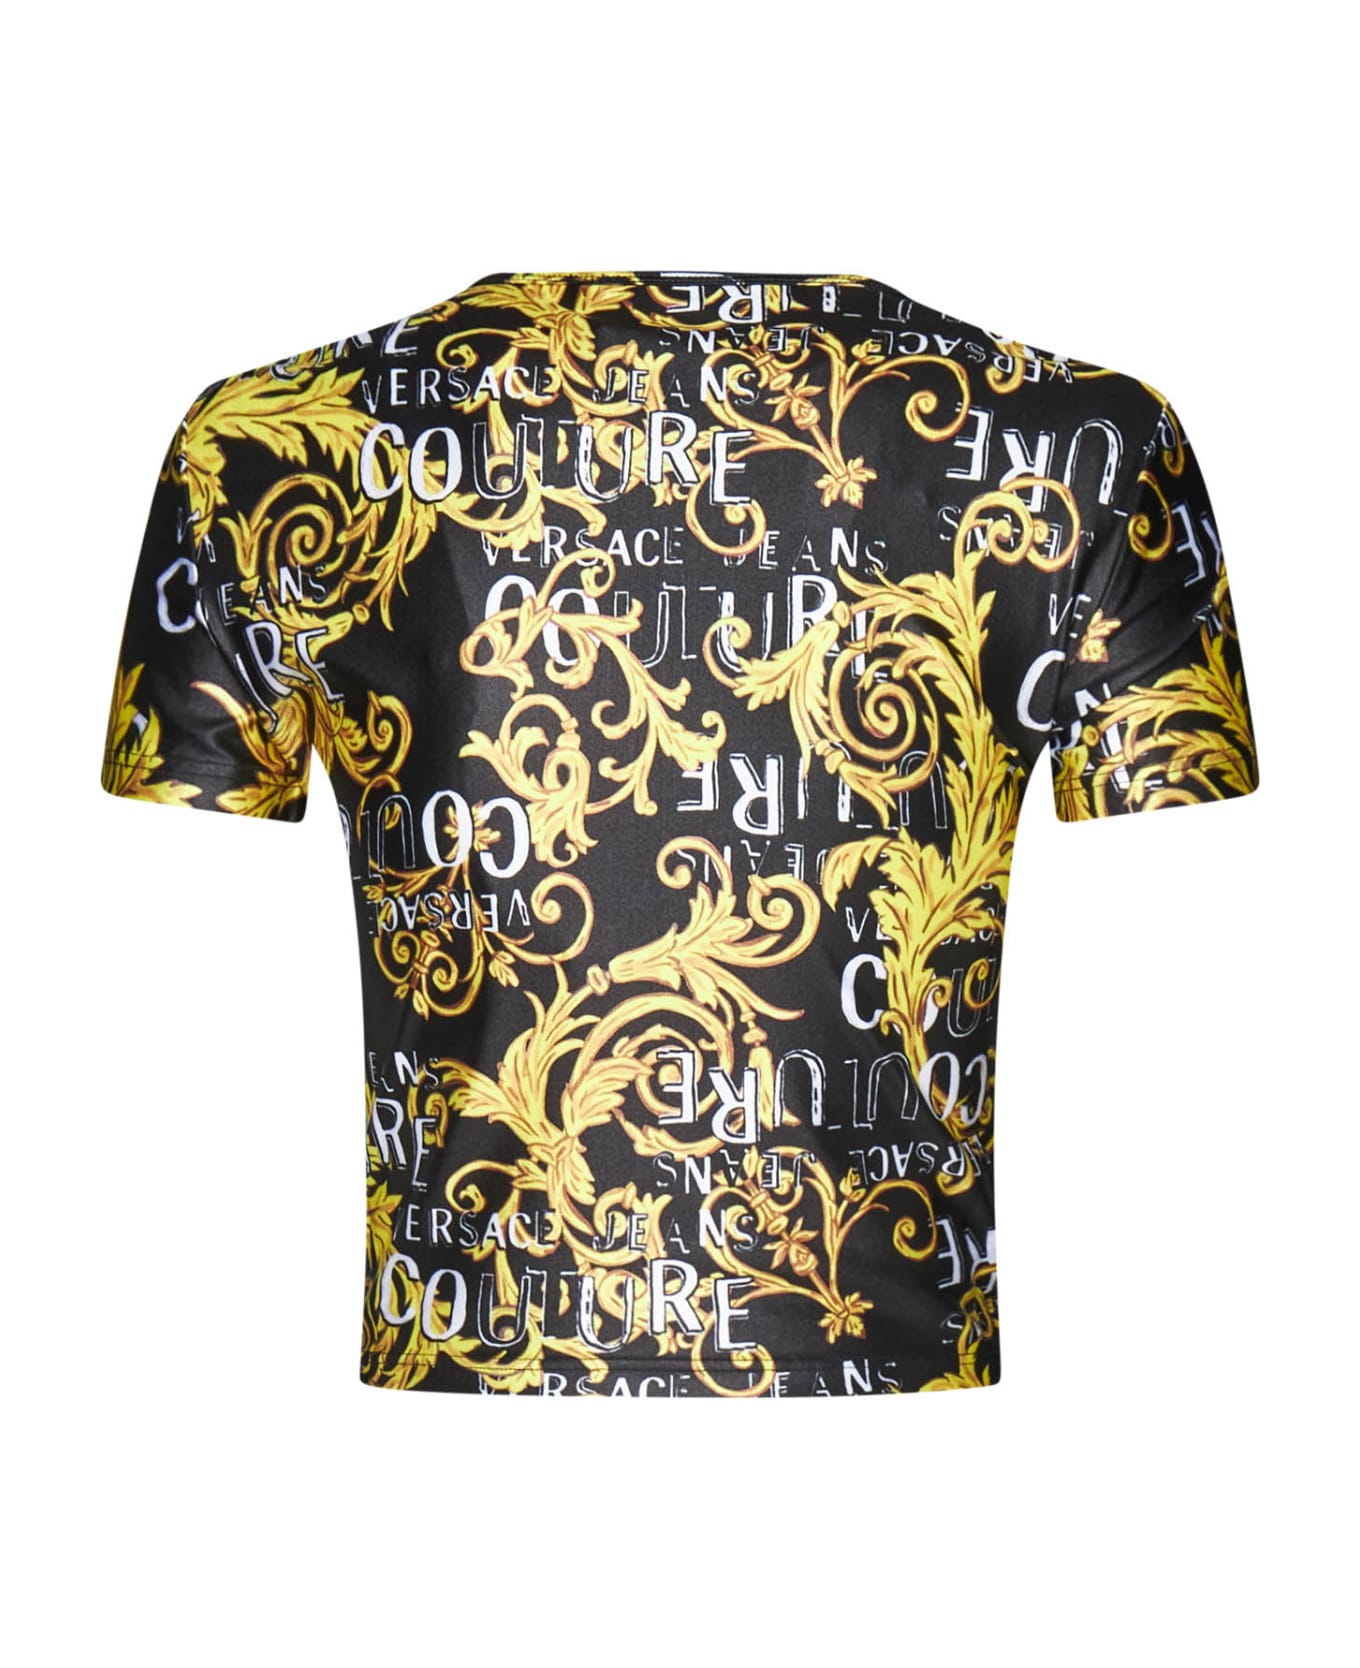 Versace Jeans Couture T-shirt - Black/gold